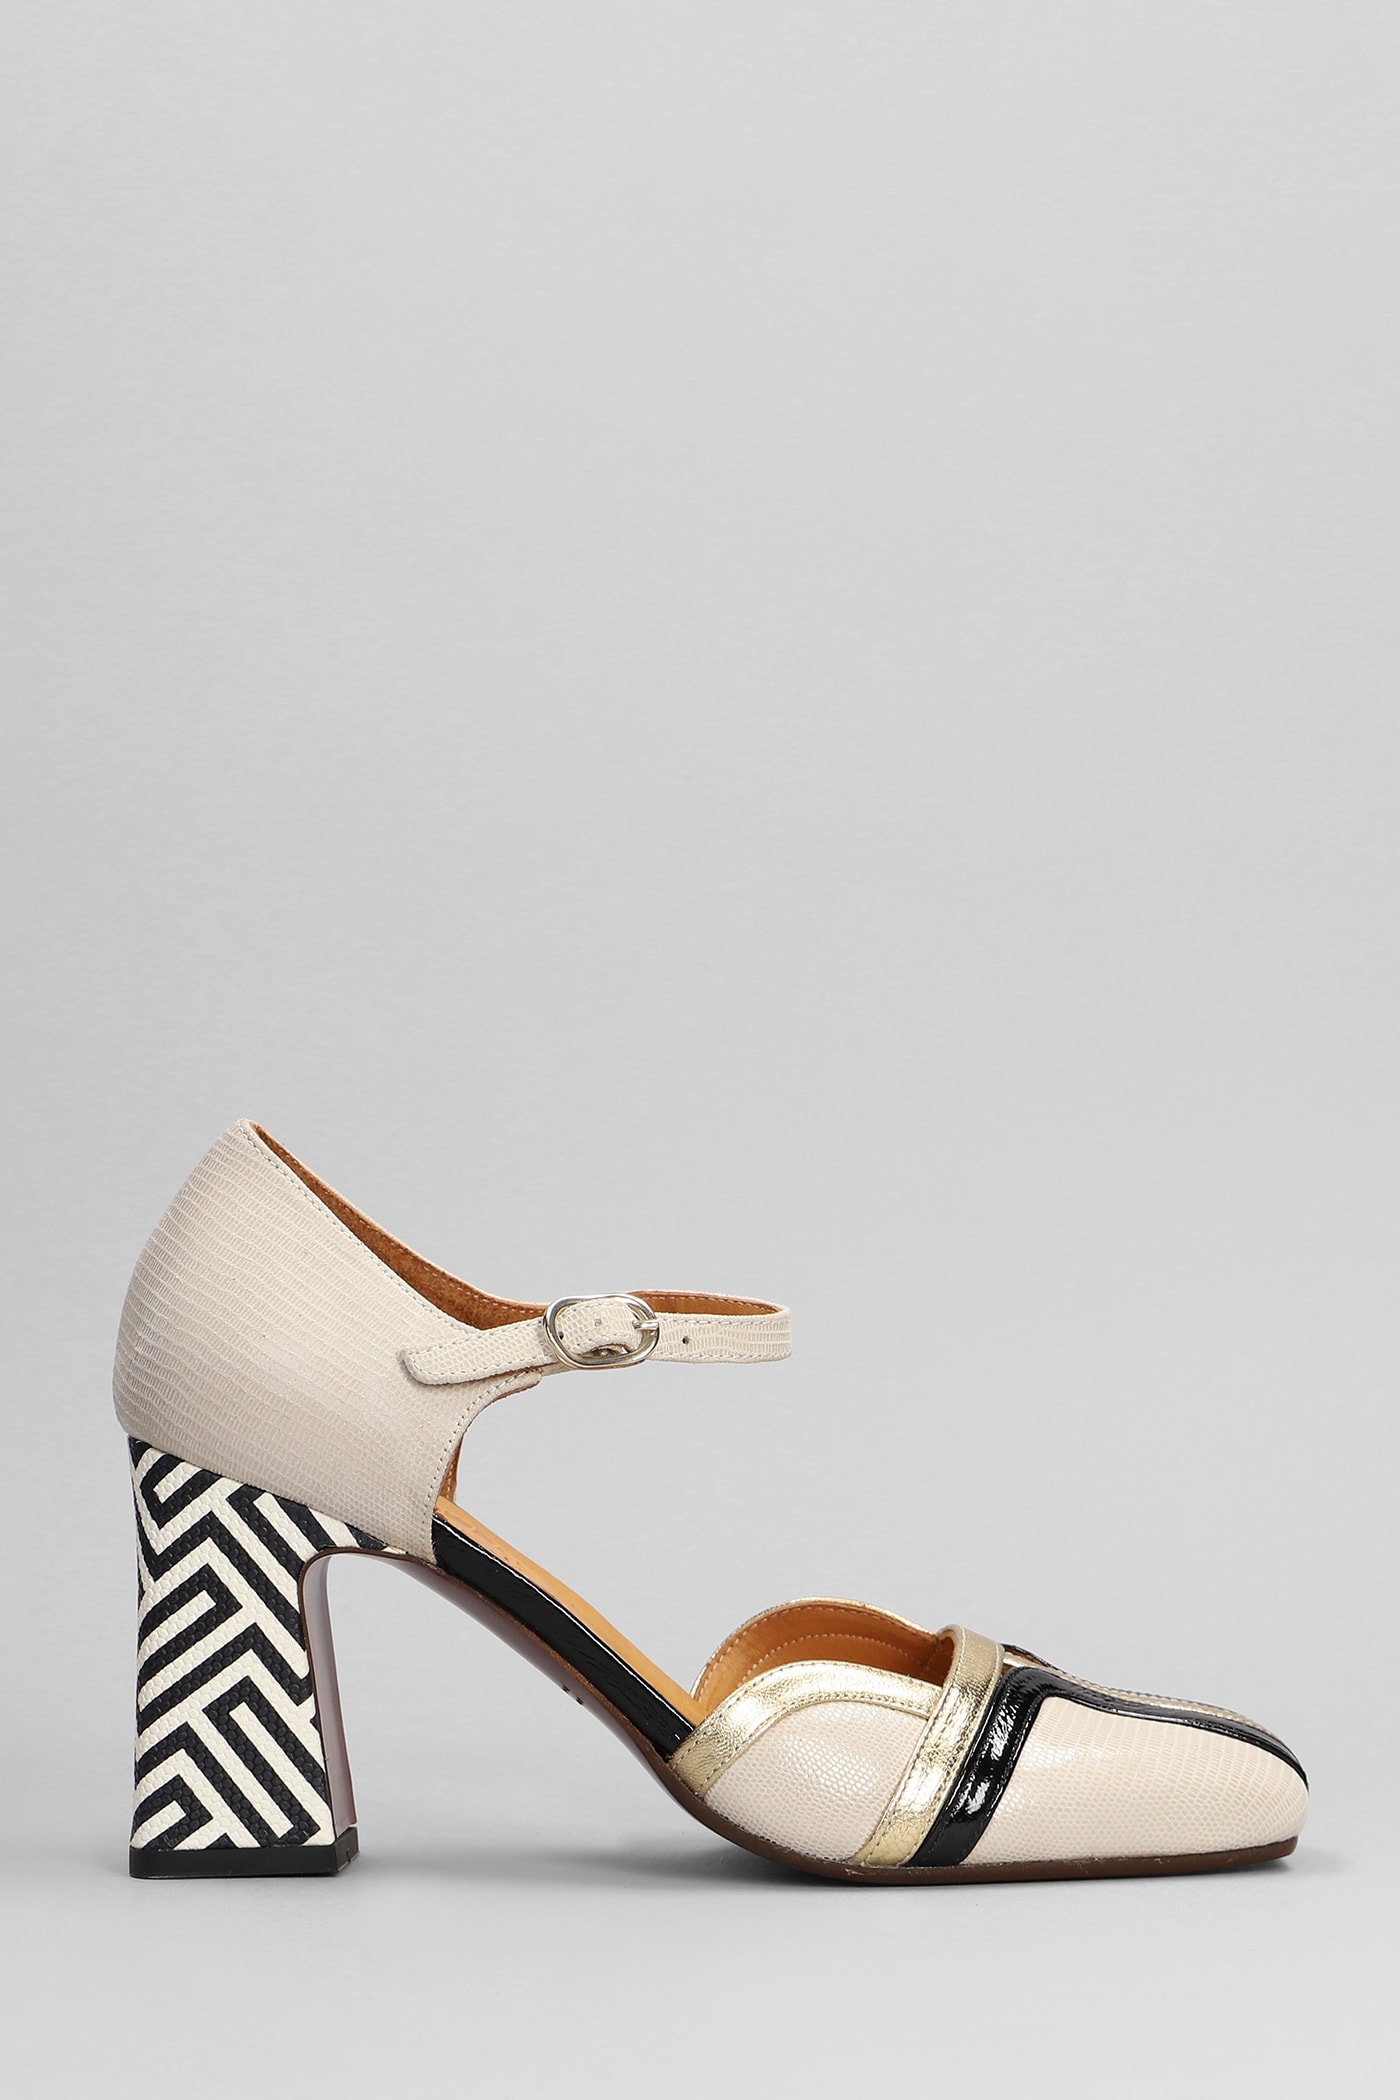 Olali Pumps In Beige Leather